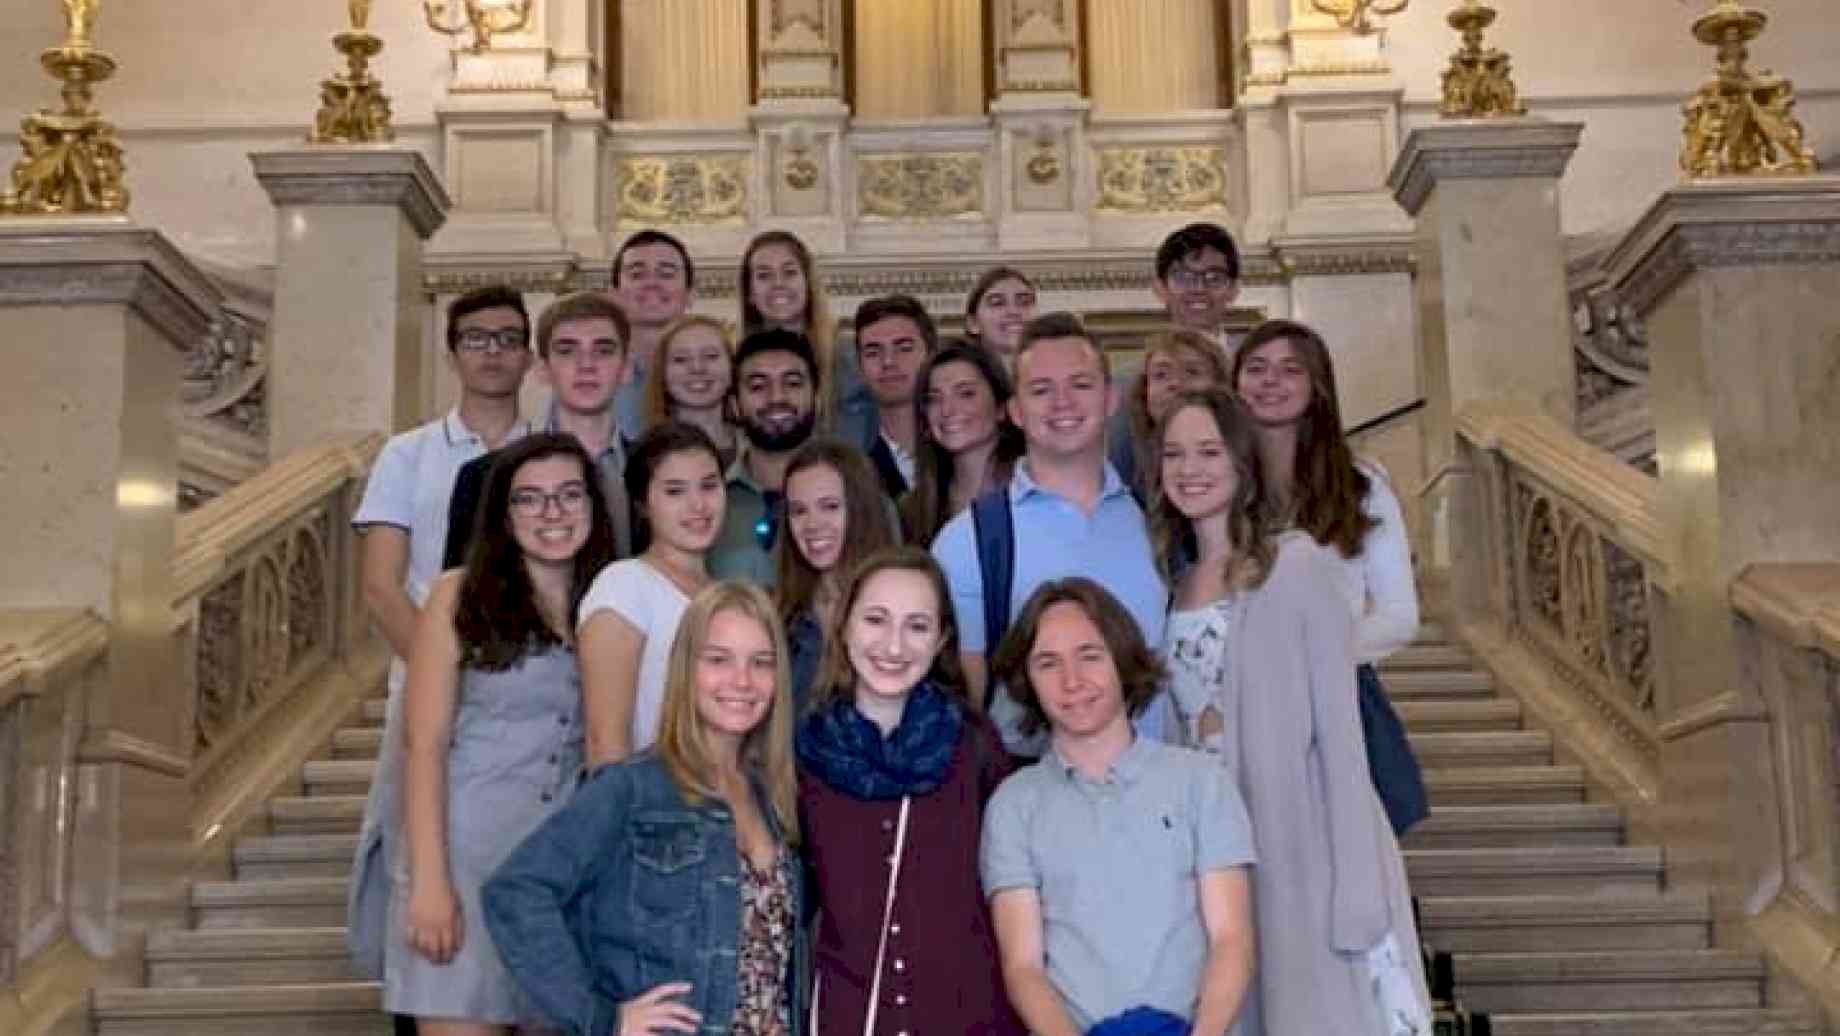 Summer 2019 group in Vienna during the tour of the Vienna Opera House